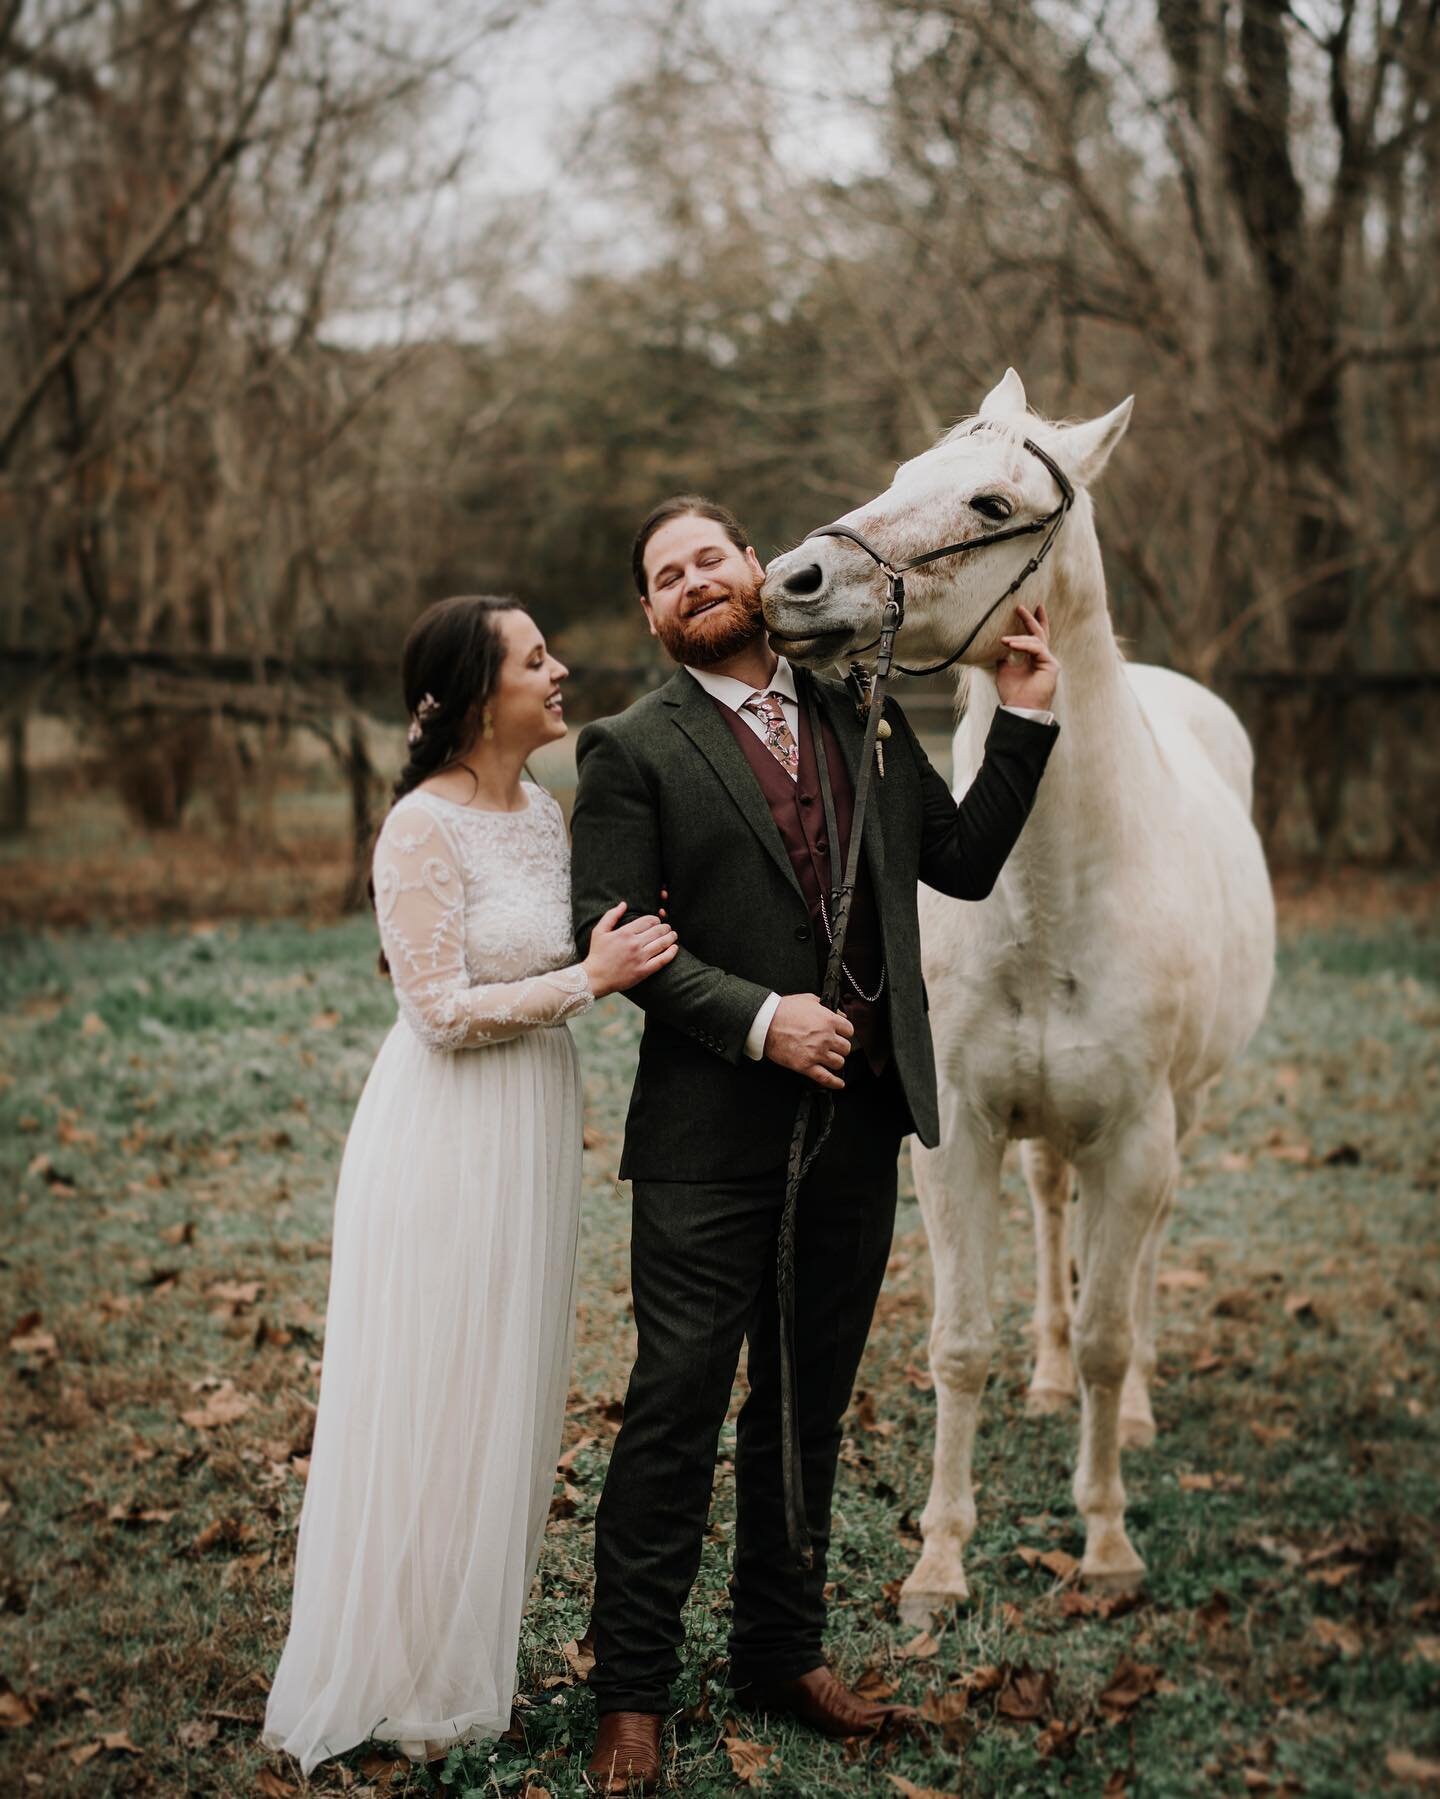 But like, has a horse ever kissed you on your wedding day?